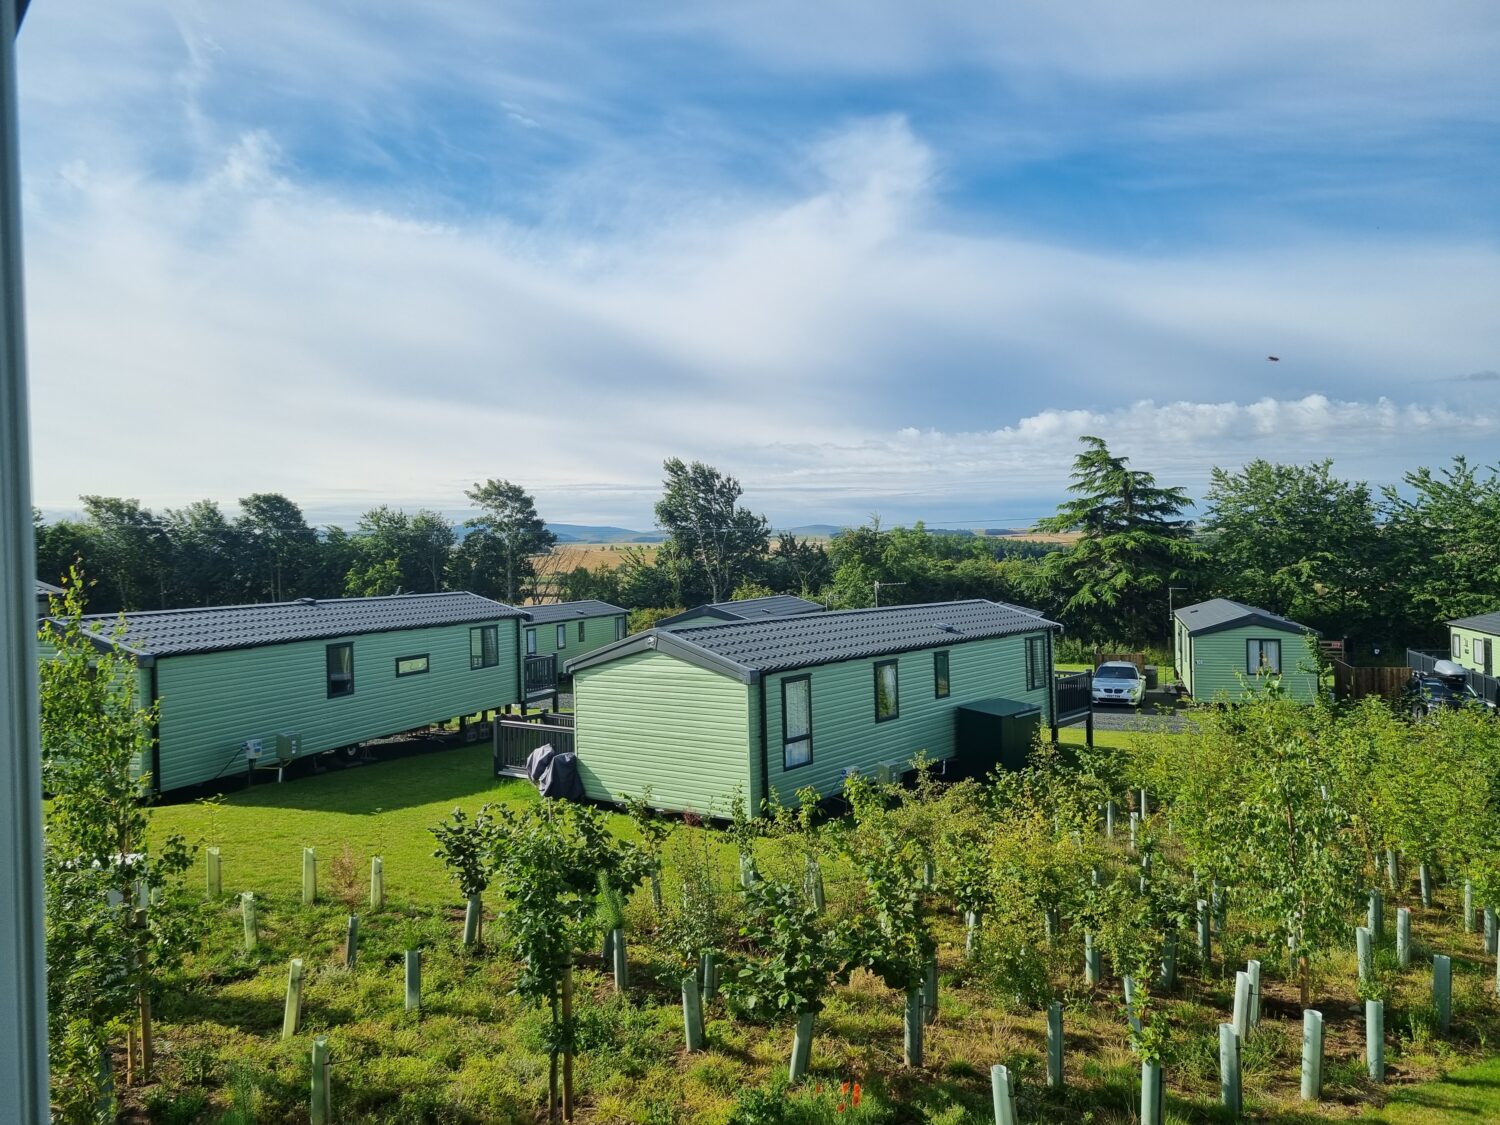 Coldstream holiday park news - Time for a Change?